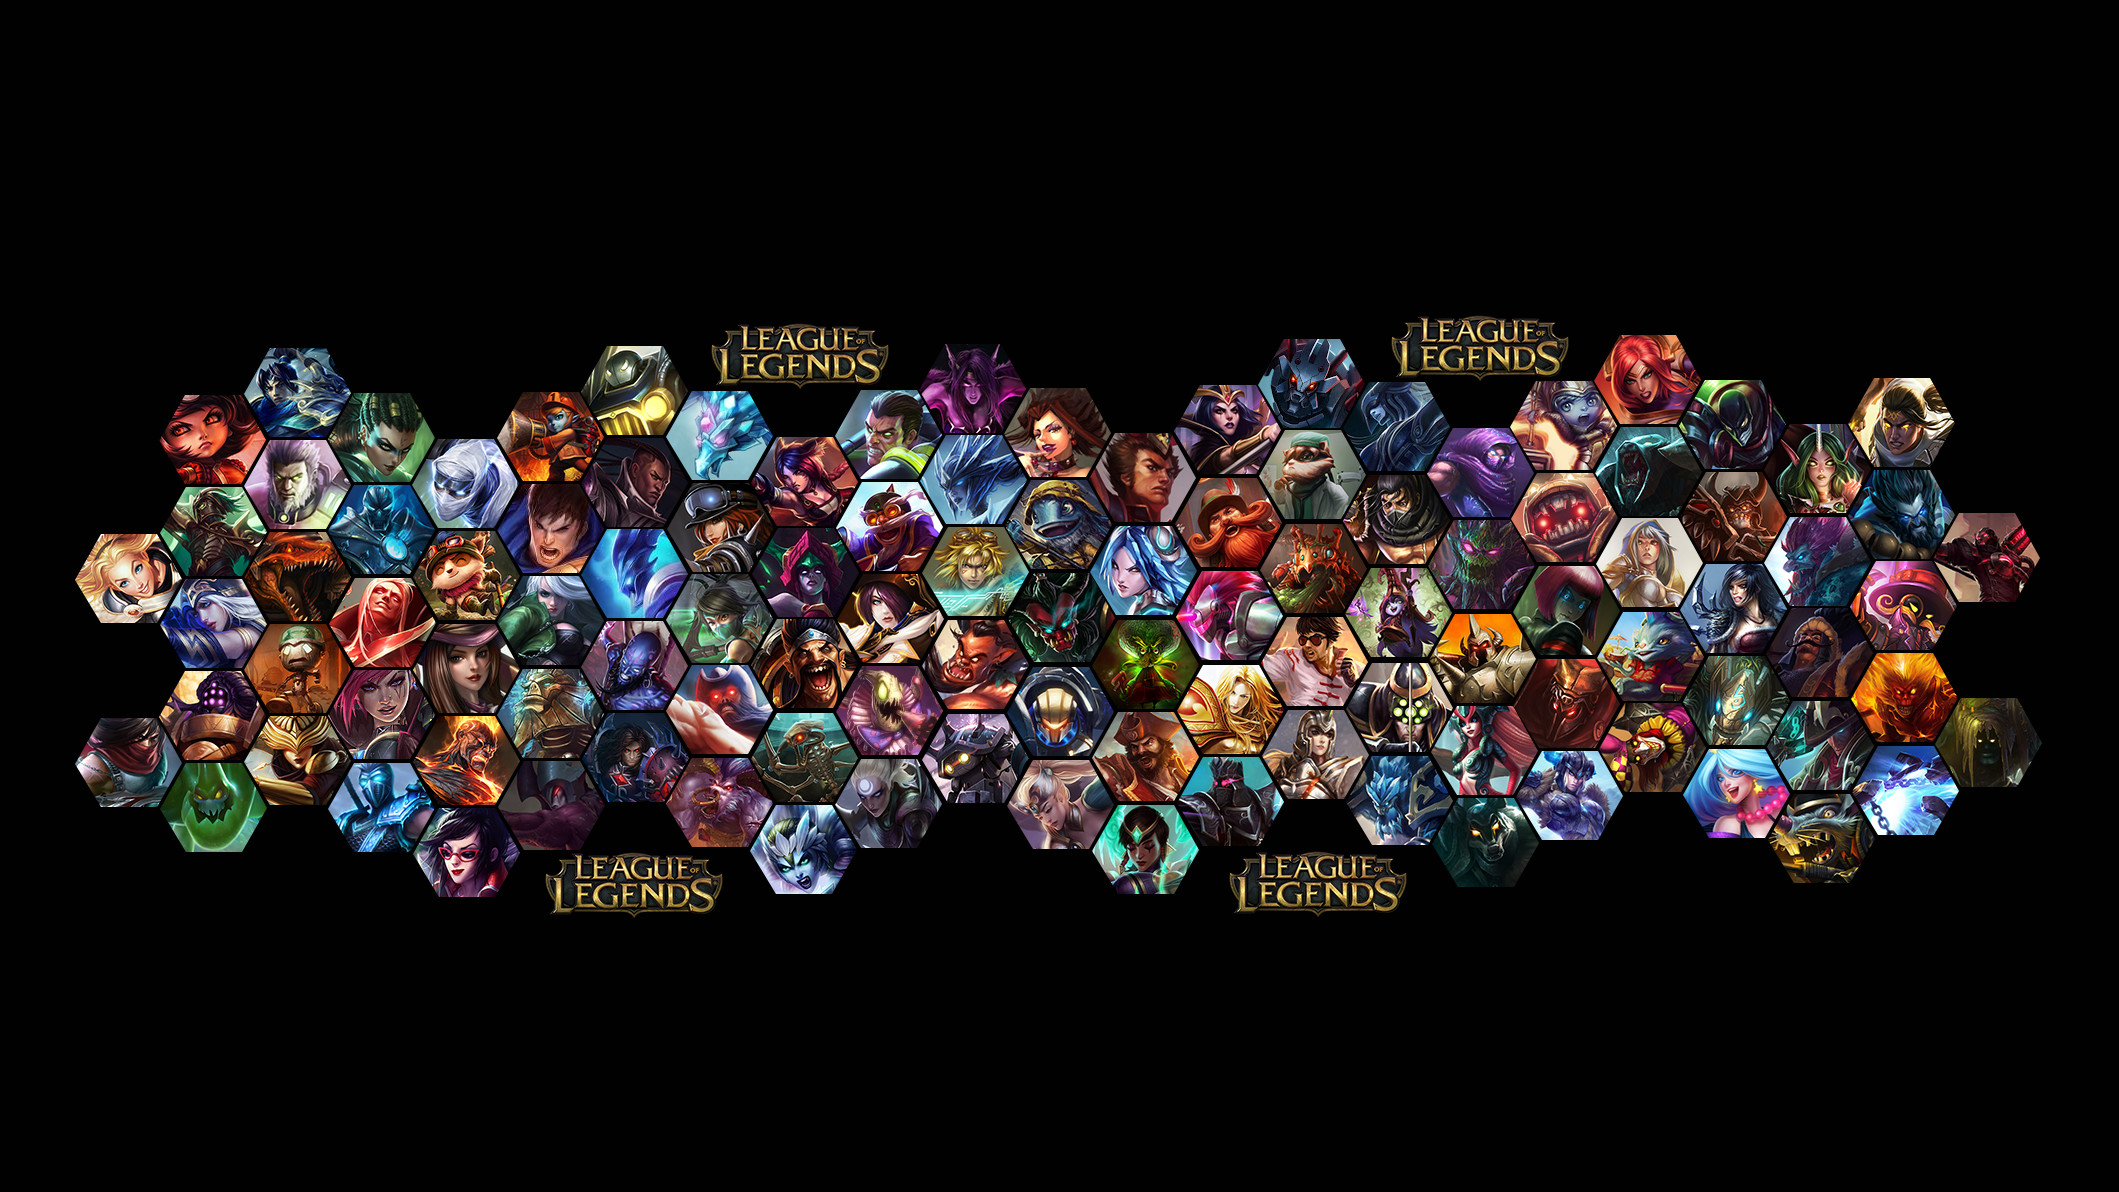 League of Legends Wallpaper full champs by ViciousBlue